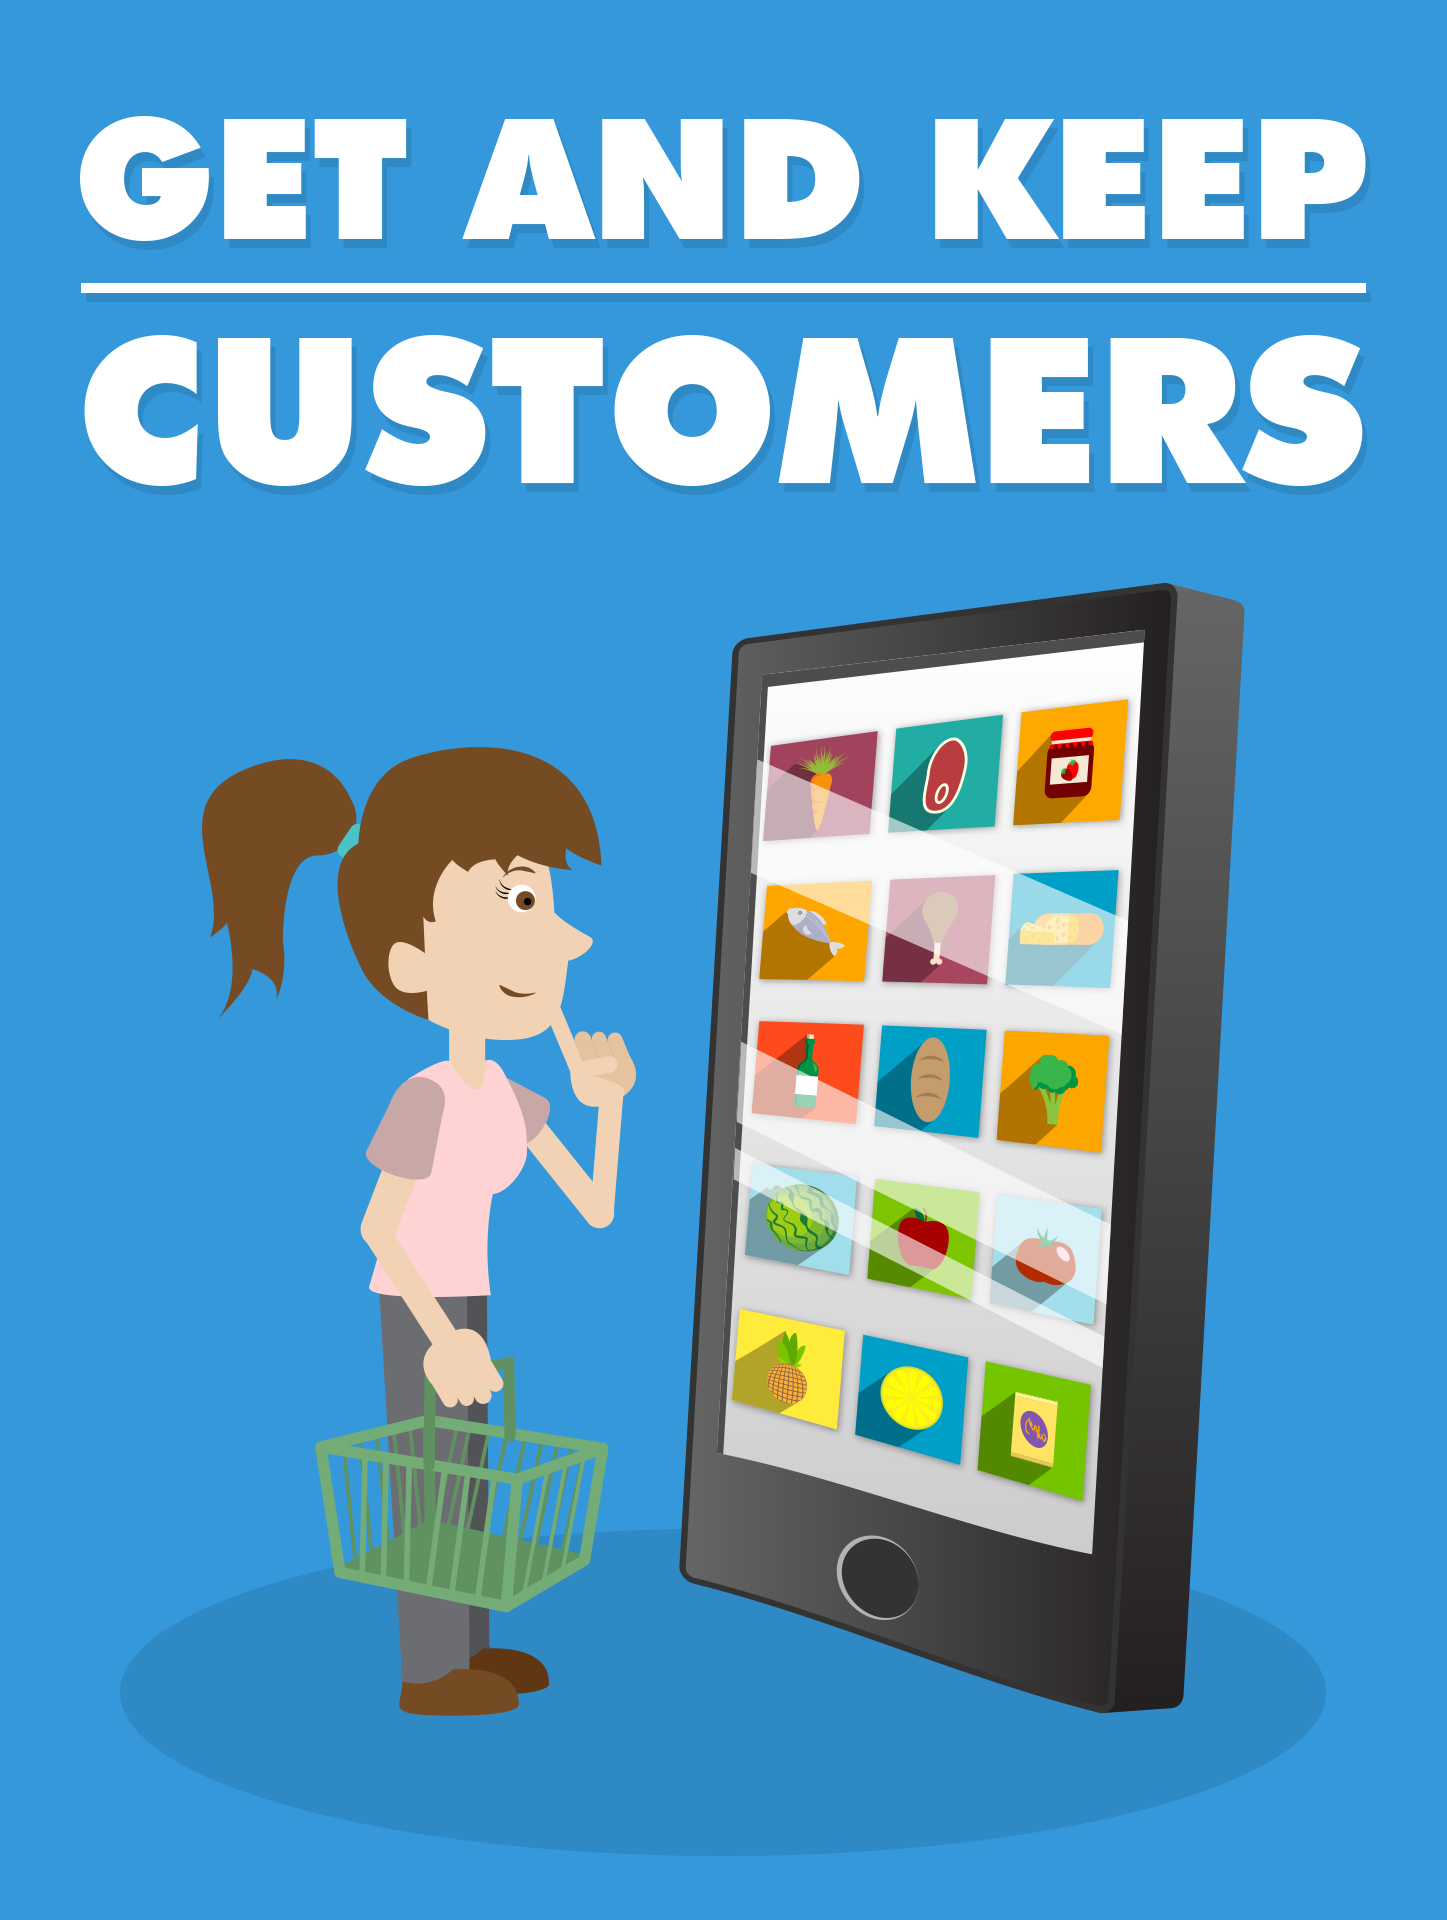 Get-And-Keep-Customers E graphic